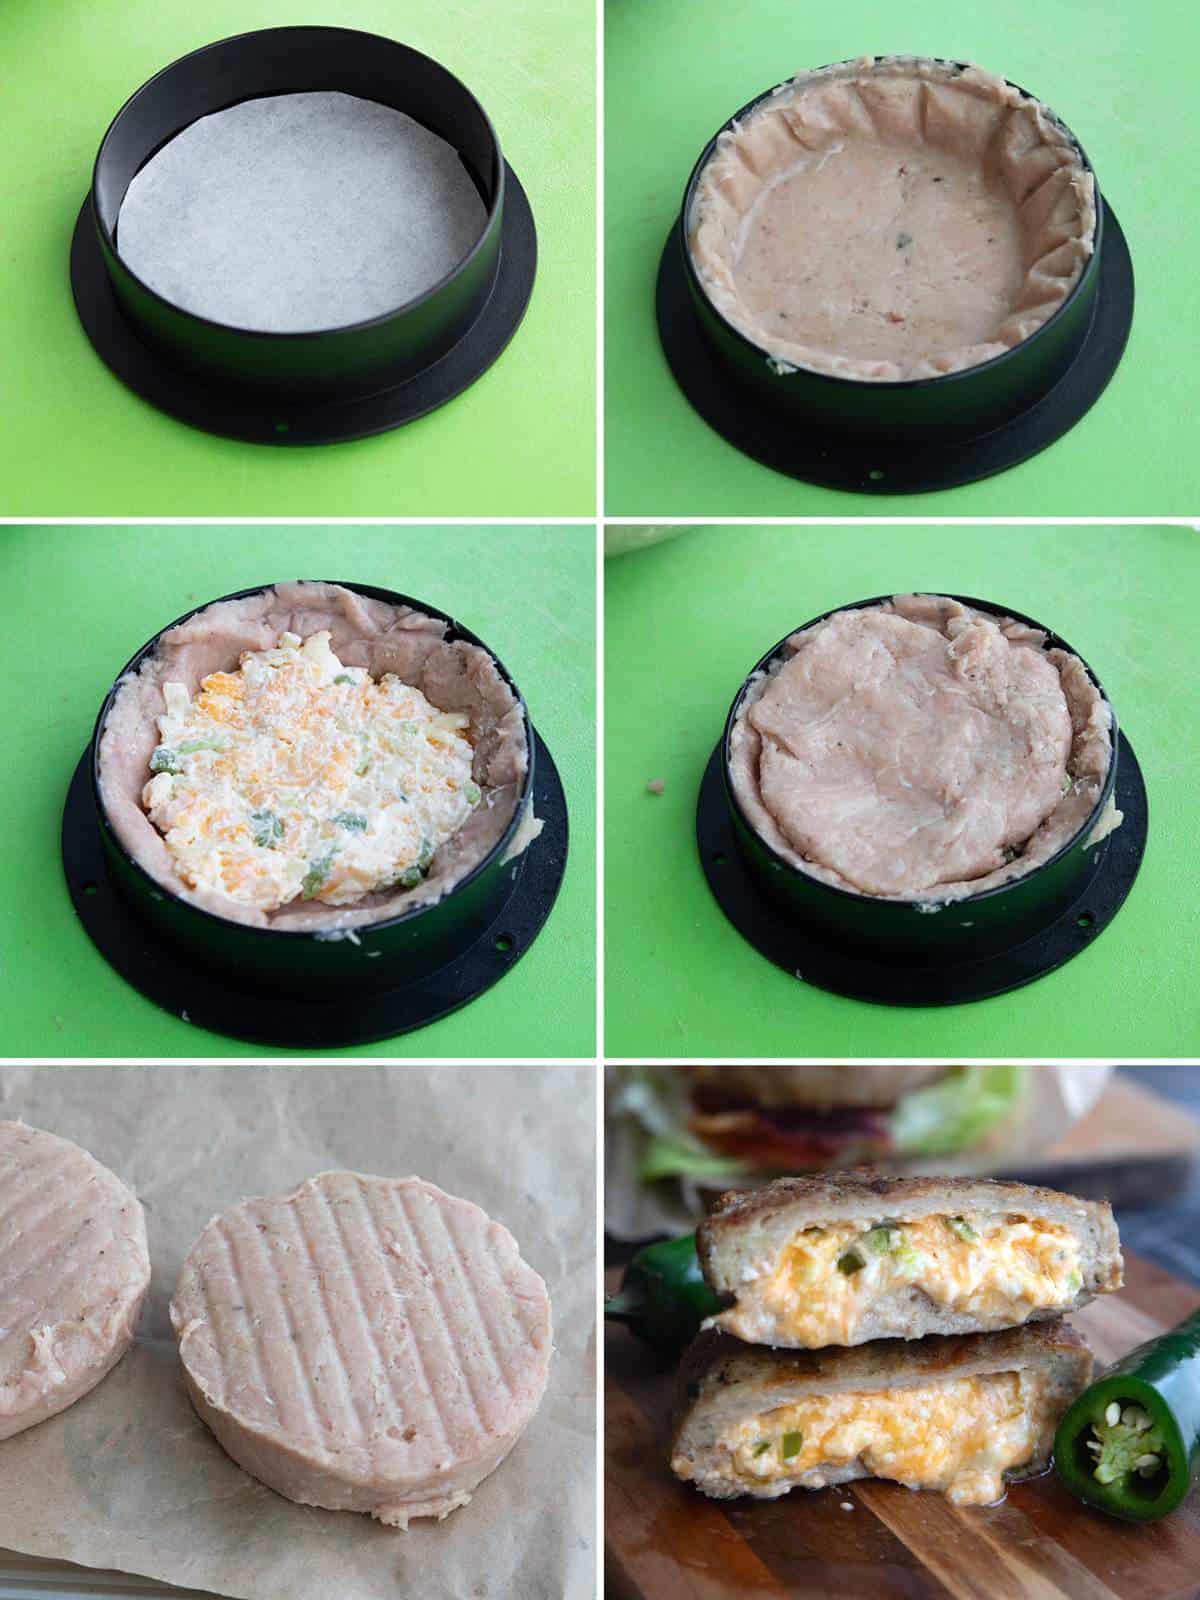 6 images showing how to make stuffed turkey burgers.